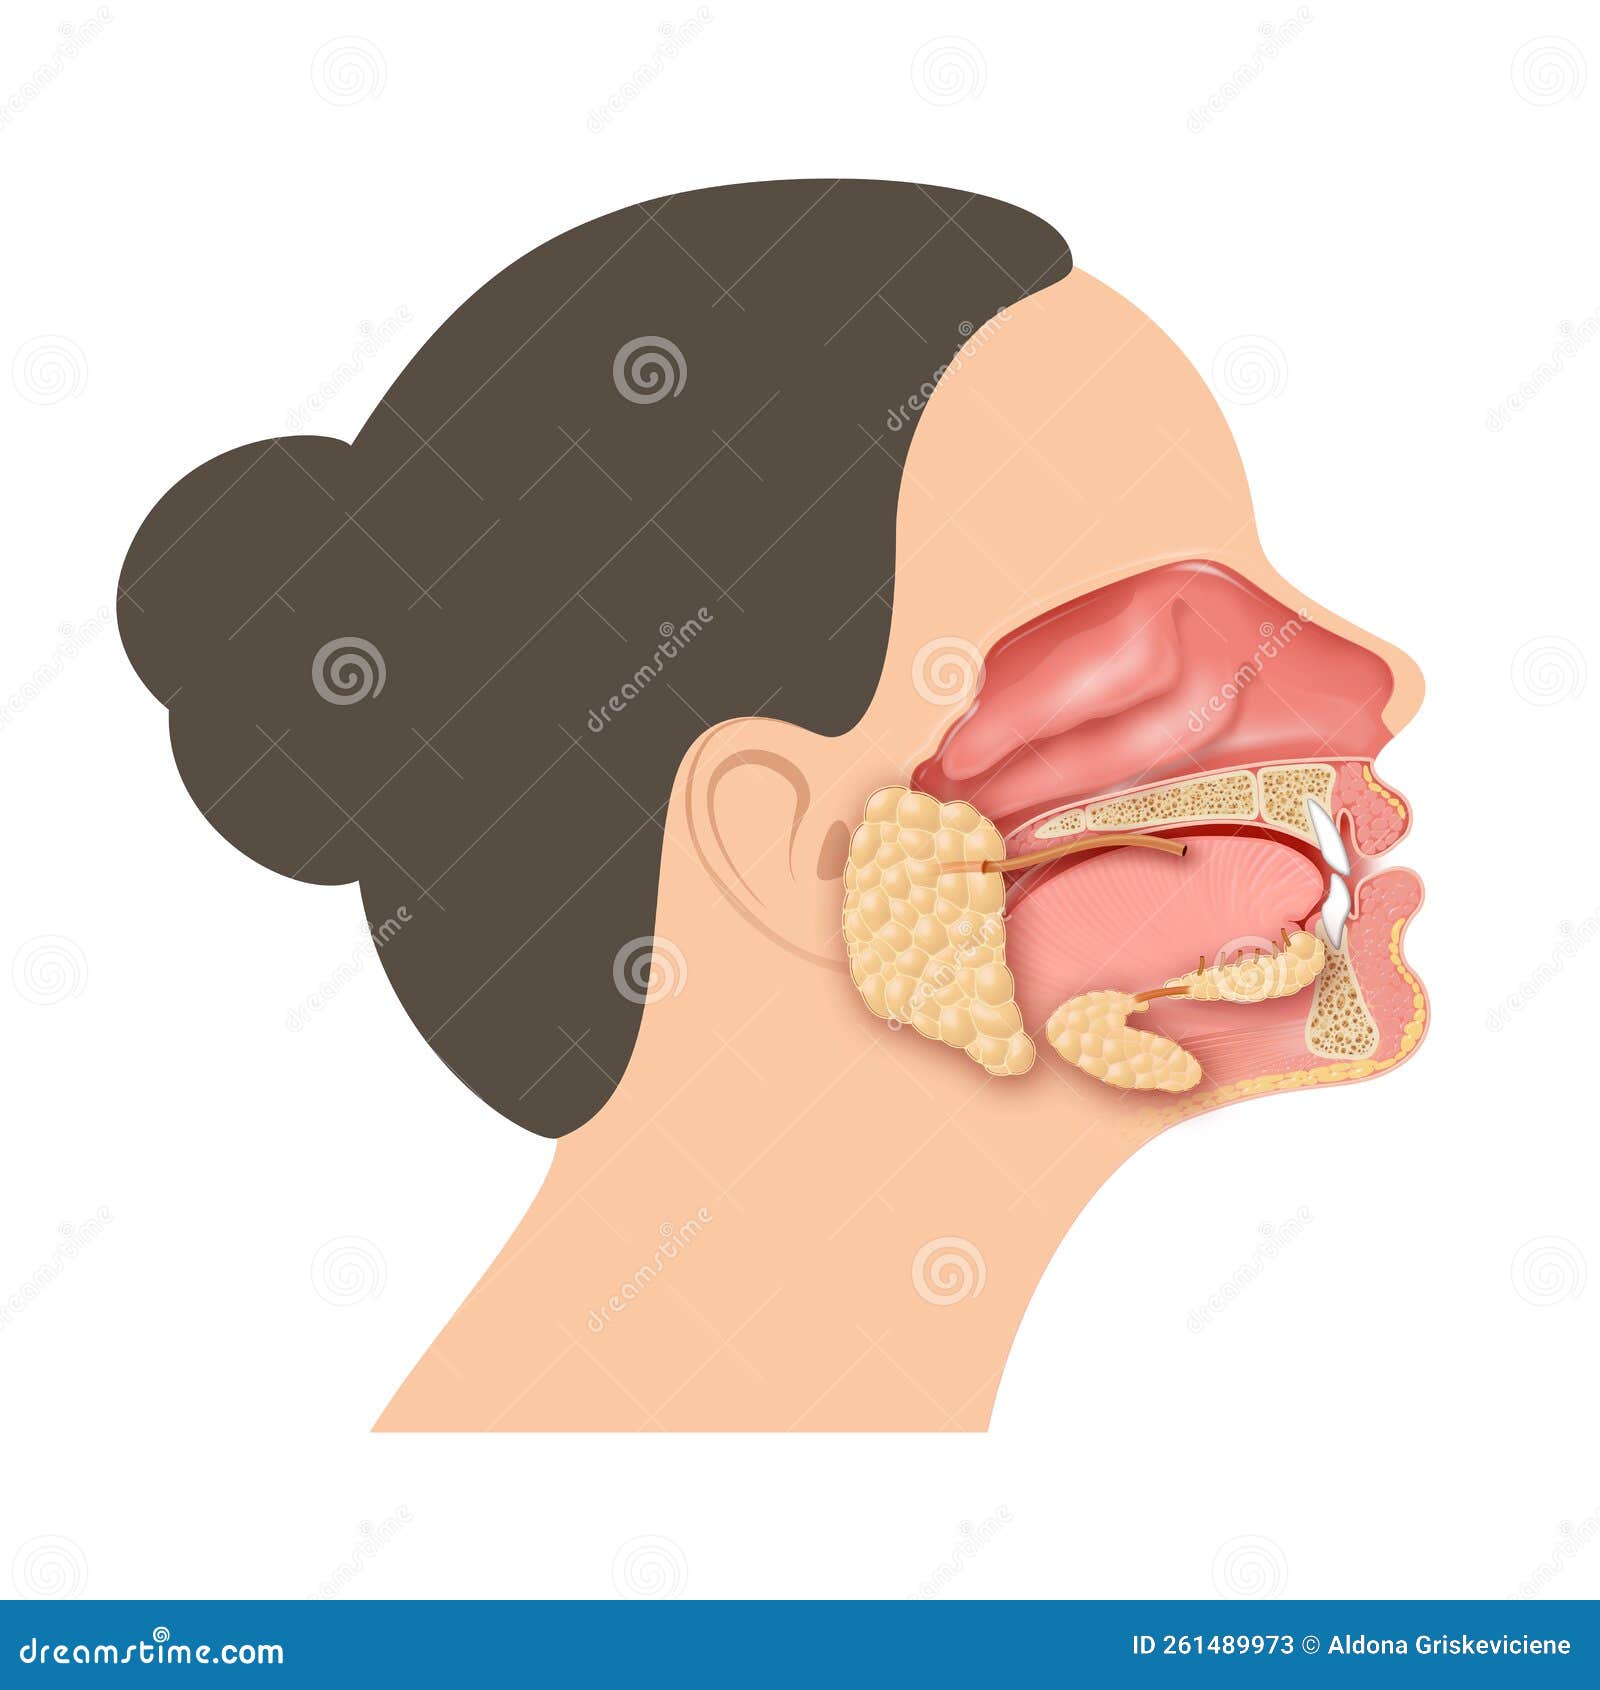 the salivary glands in the mouth